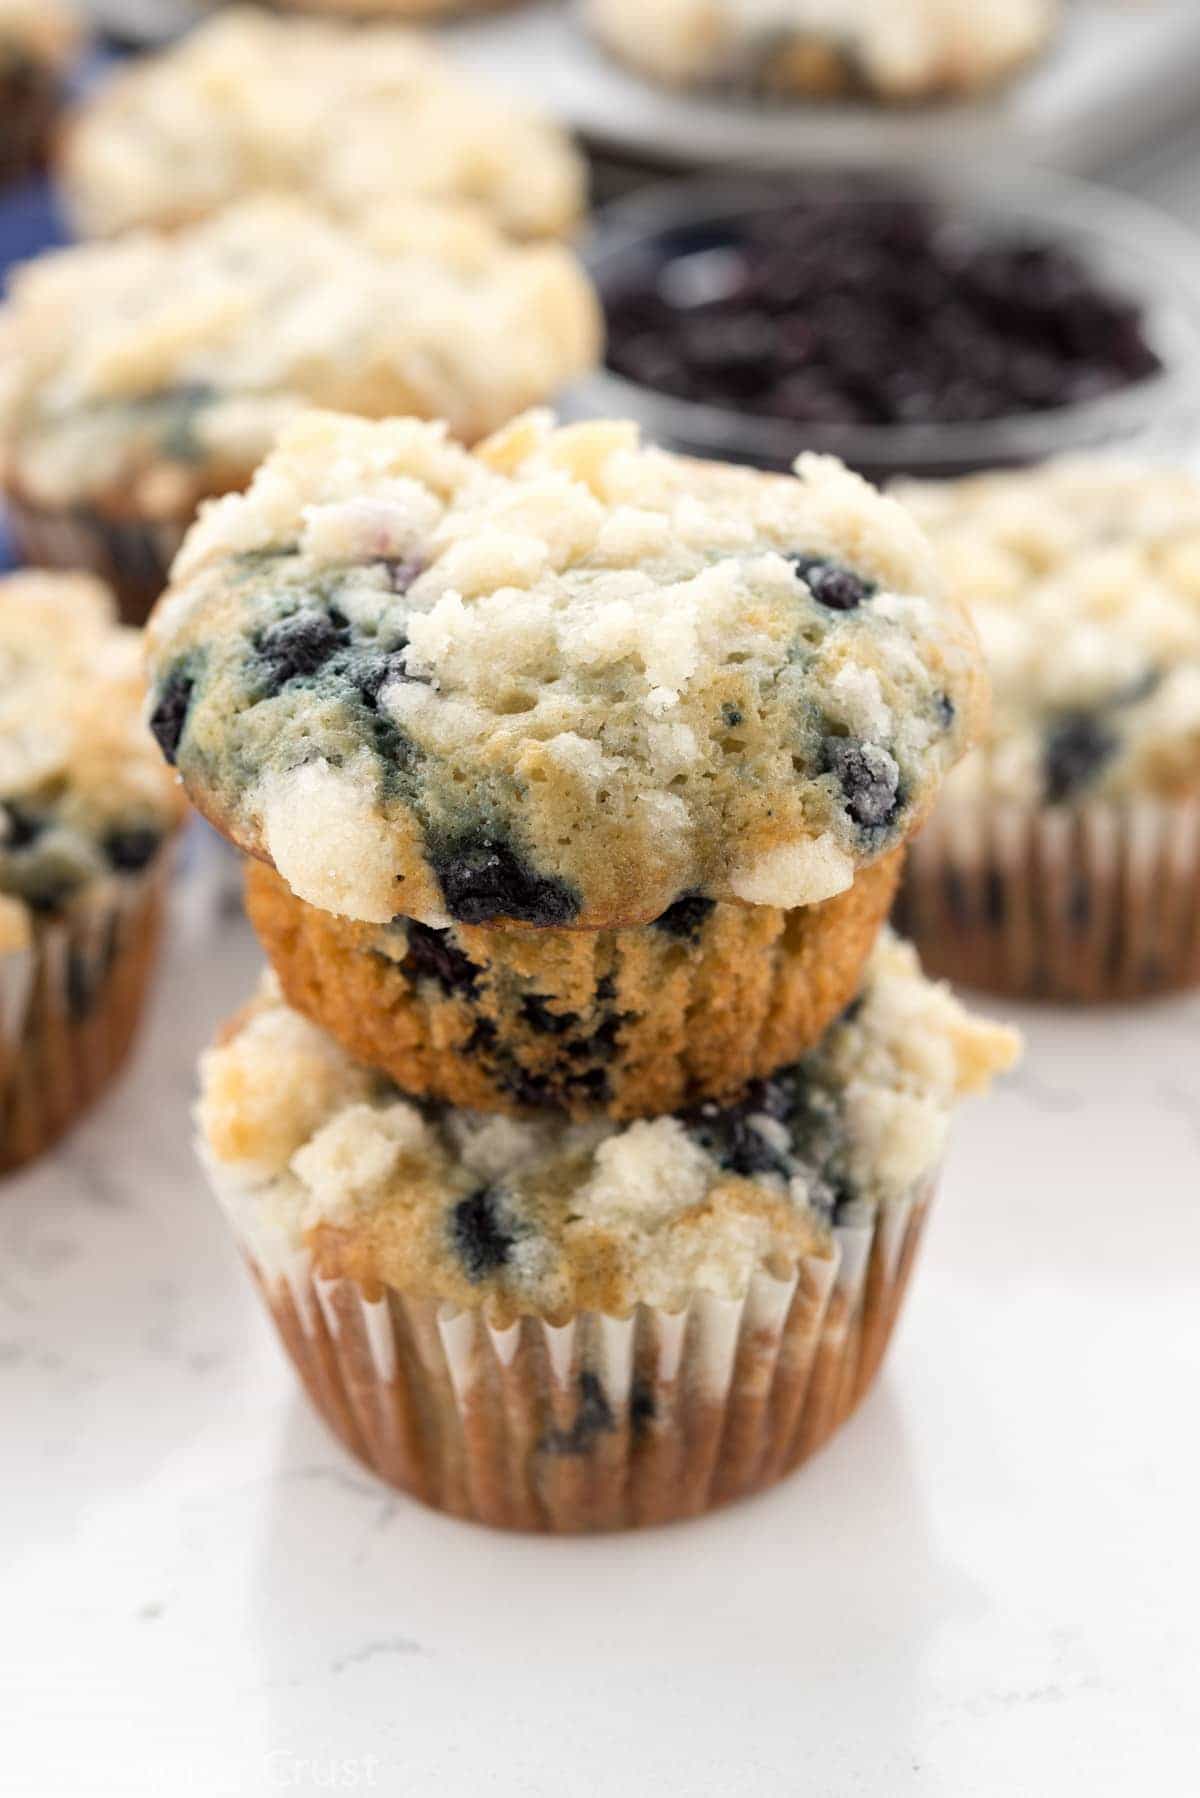 Blueberry Cream Cheese Muffins - easy blueberry muffins filled with cream cheese filling!